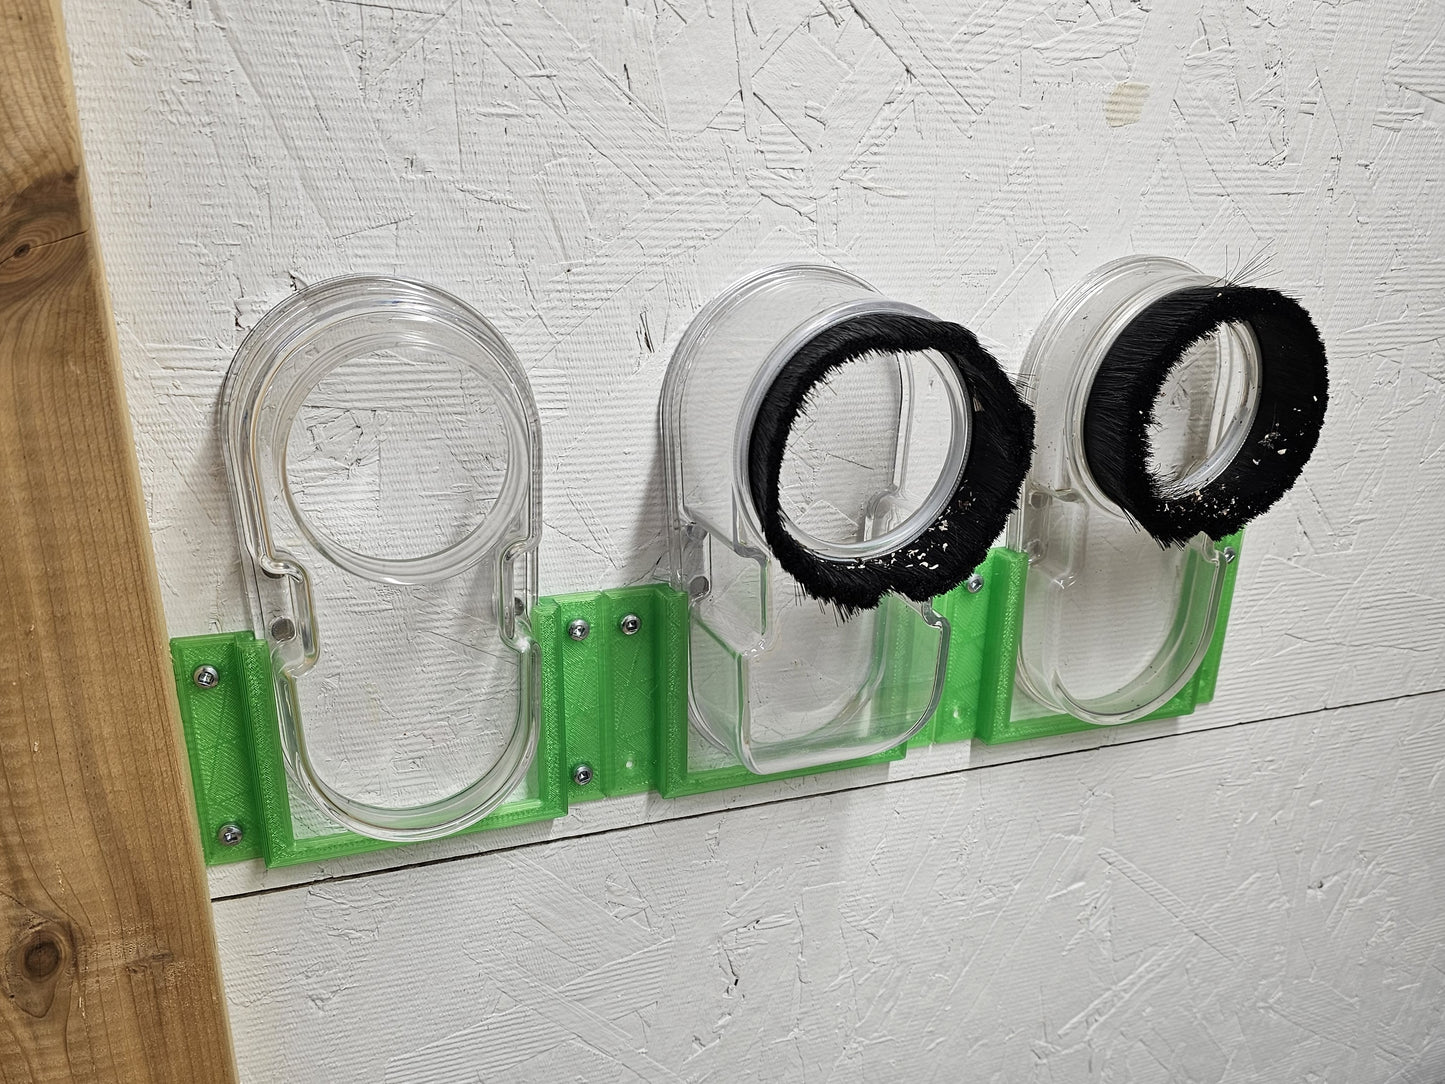 Holder for Carbide3d Shapeoko Sweepy 2.0 Dust Boot Bottom - Holds neatly against a wall or flat surface - 3D Printed - Single or 3 Pack